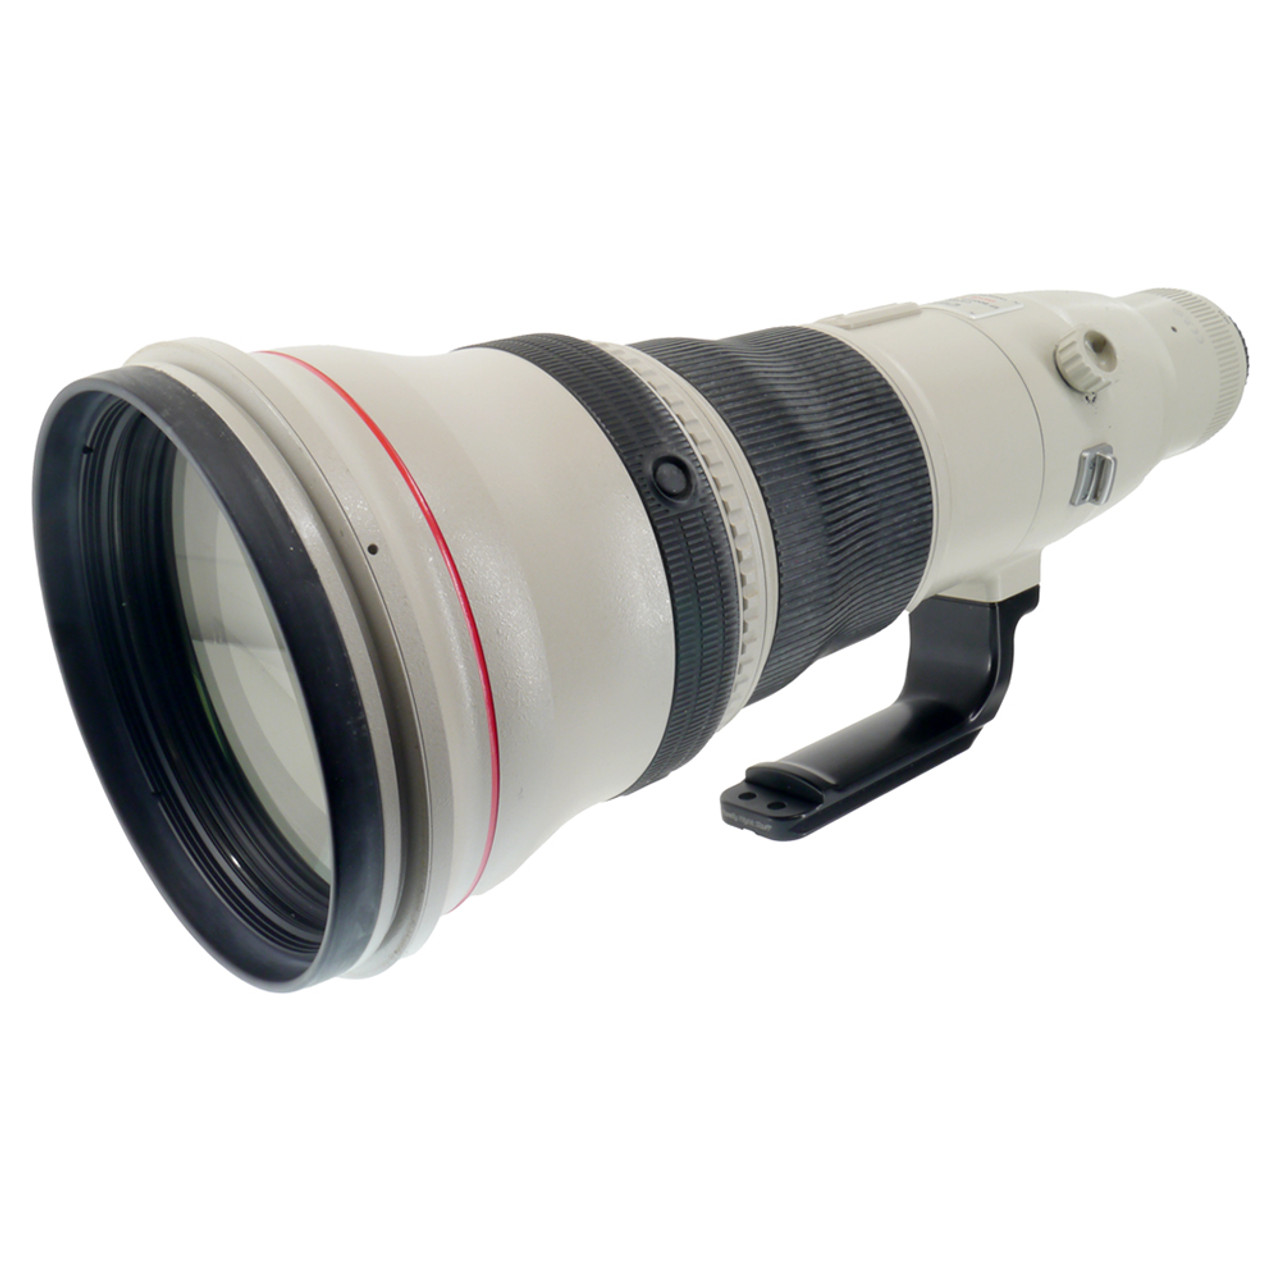 USED CANON EF 800MM F5.6 L IS (756365)